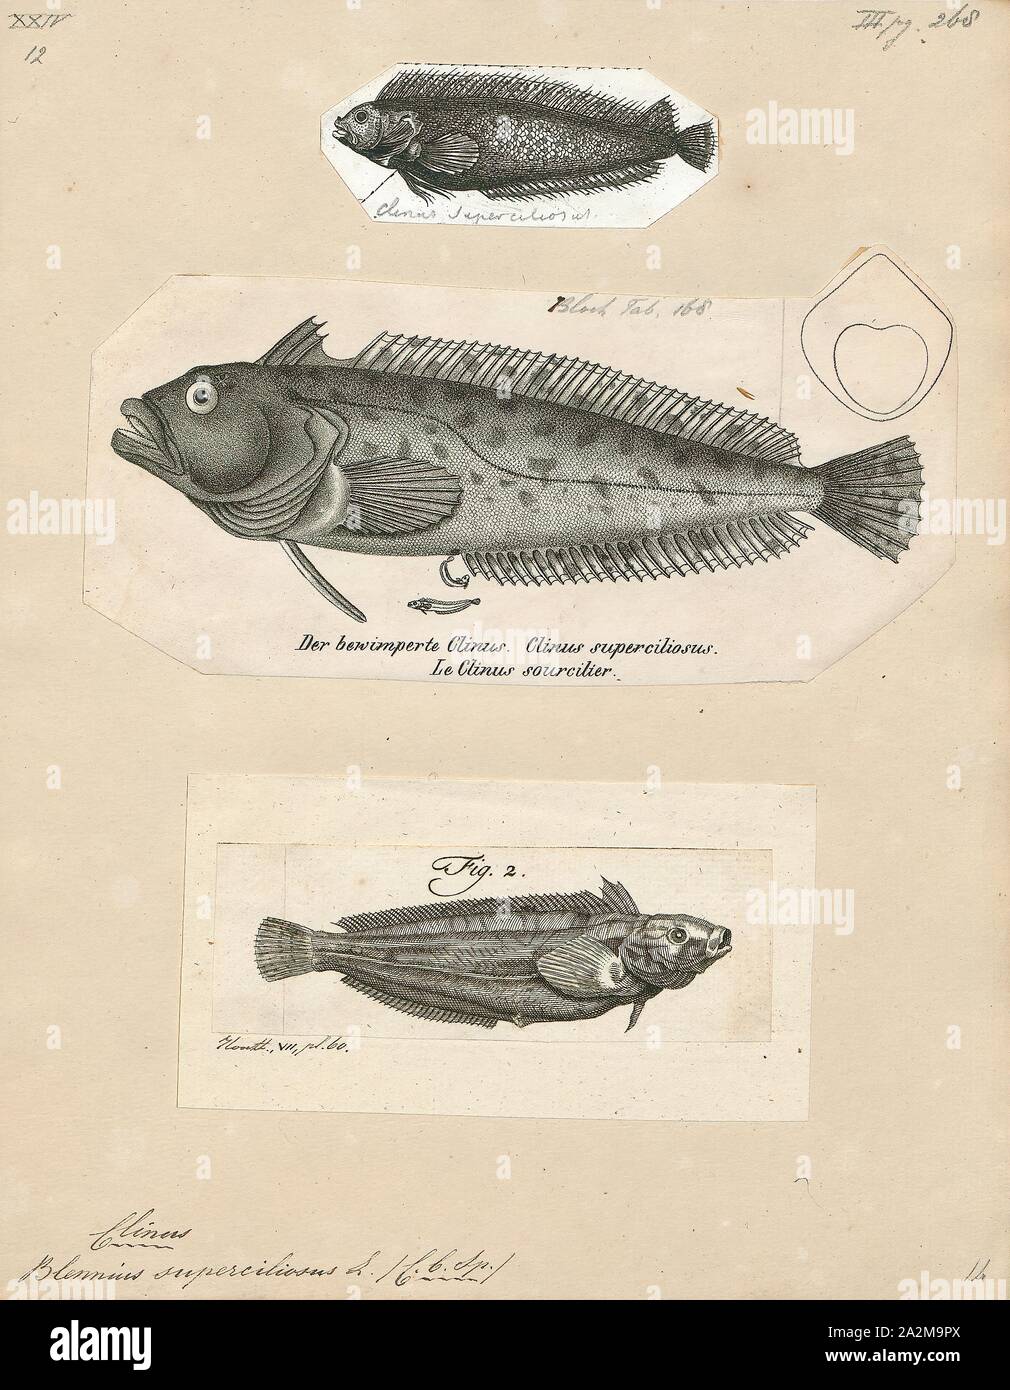 Clinus superciliosus, Print, Clinus superciliosus, the Super klipfish or Highfin klipfish, is a species of clinid that occurs in subtropical waters of the Atlantic Ocean from northern Namibia to the Kei River in South Africa where it can be found in the subtidal and intertidal zones. This species can reach a maximum length of 30 centimetres (12 in) TL. This species feeds on benthic crustaceans including amphipods, isopods and crabs; sea urchins; gastropods; polychaete worms and other fishes., 1700-1880 Stock Photo